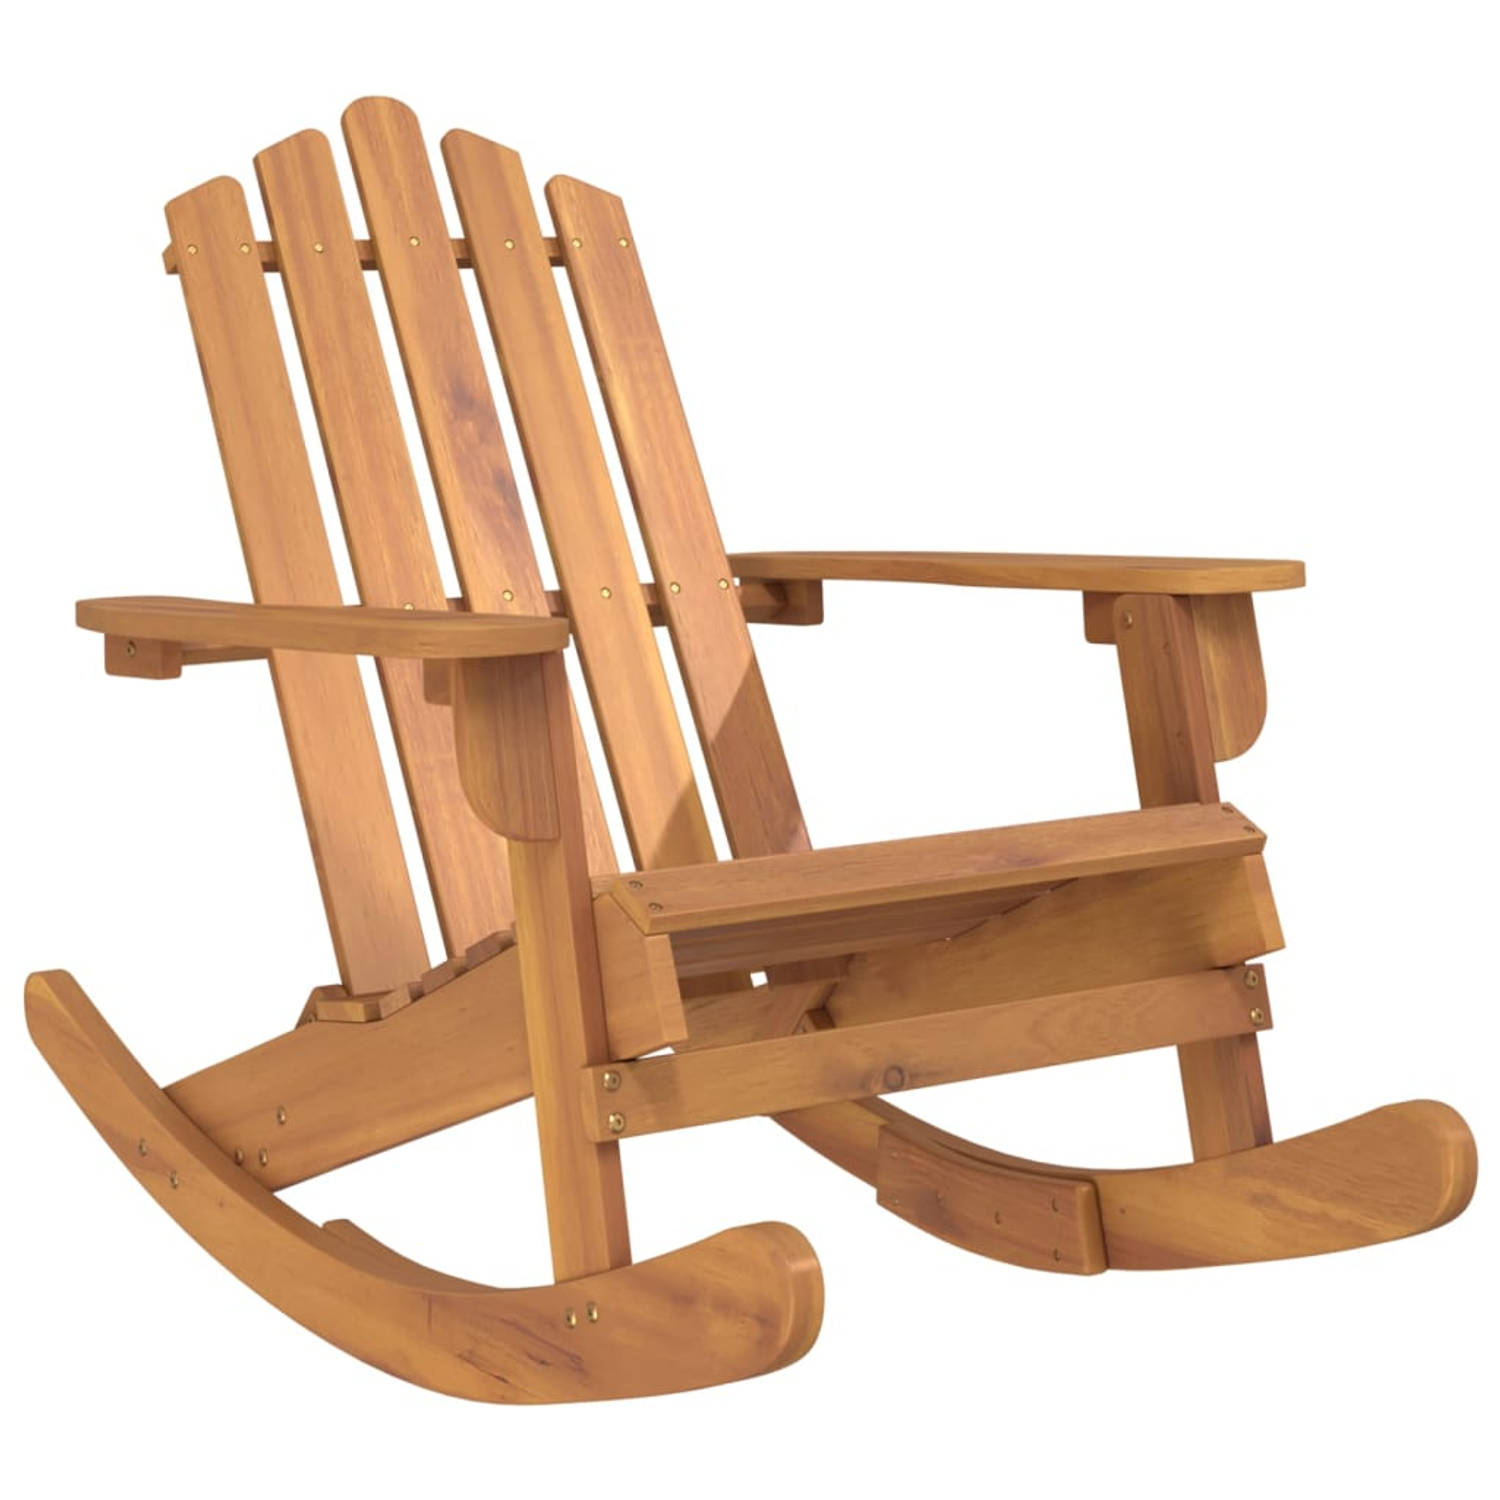 The Living Store Adirondack schommelstoel - Hout - 75 x 105 x 90 cm - Massief acaciahout - Draagvermogen 110 kg